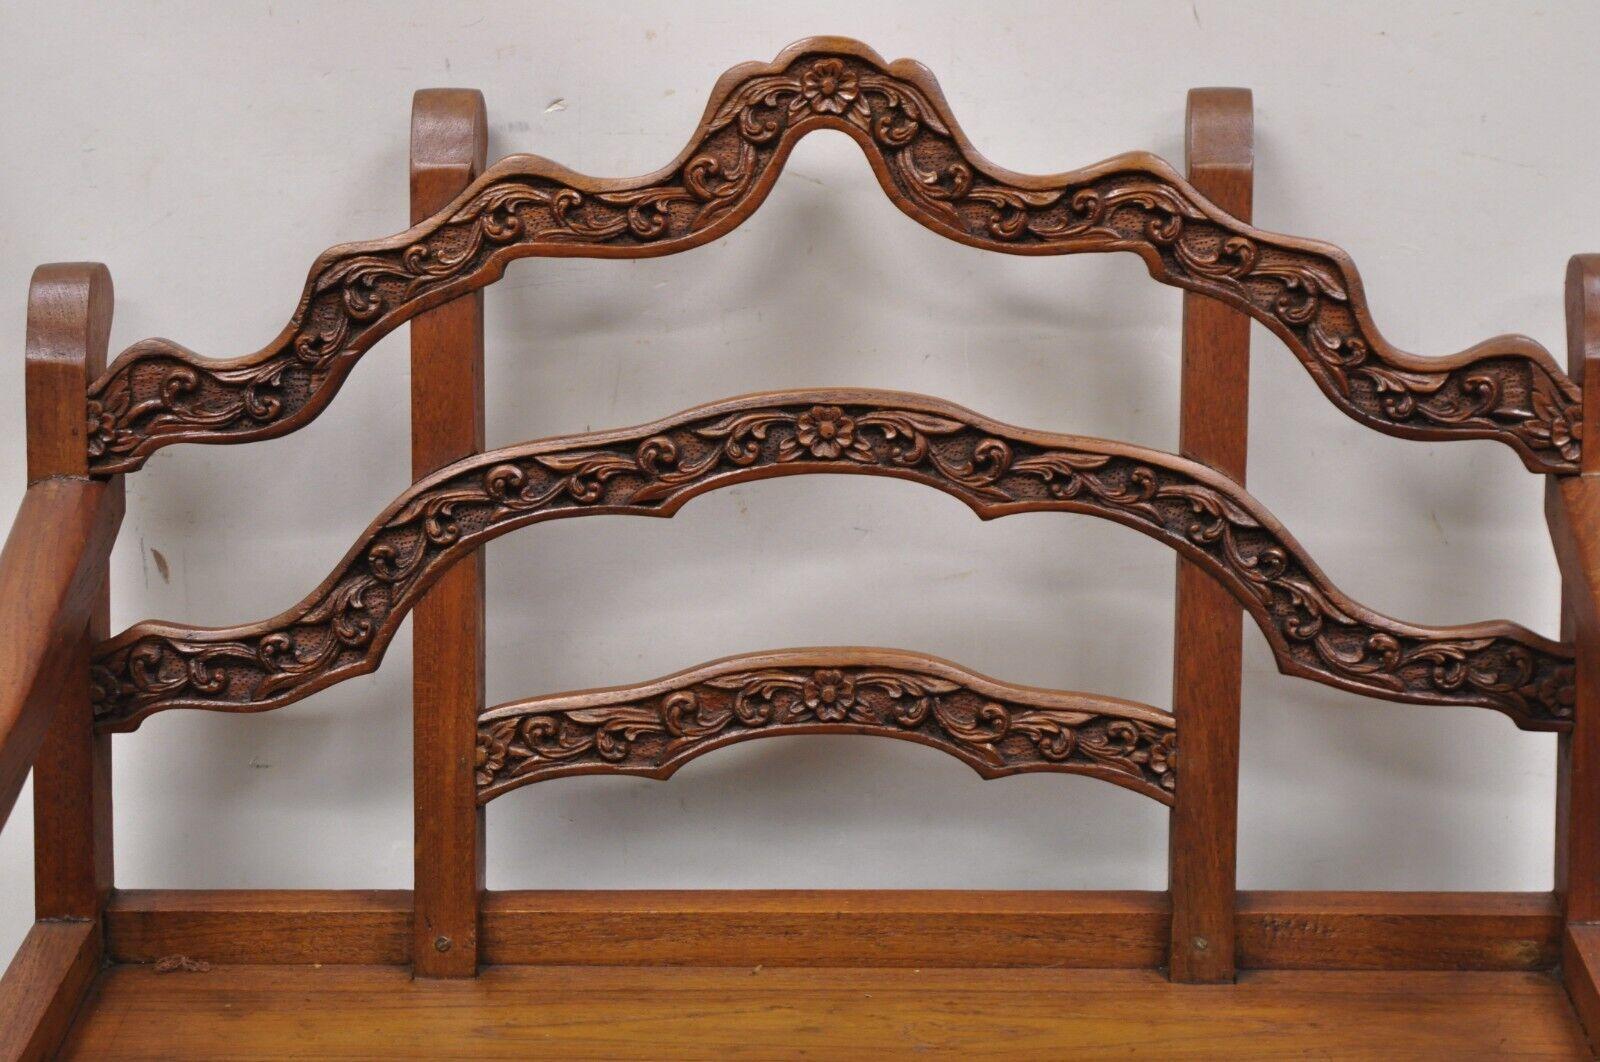 Vintage Chinoiserie Carved Teak Wood Howdah Elephant Saddle Accent Chair In Good Condition For Sale In Philadelphia, PA